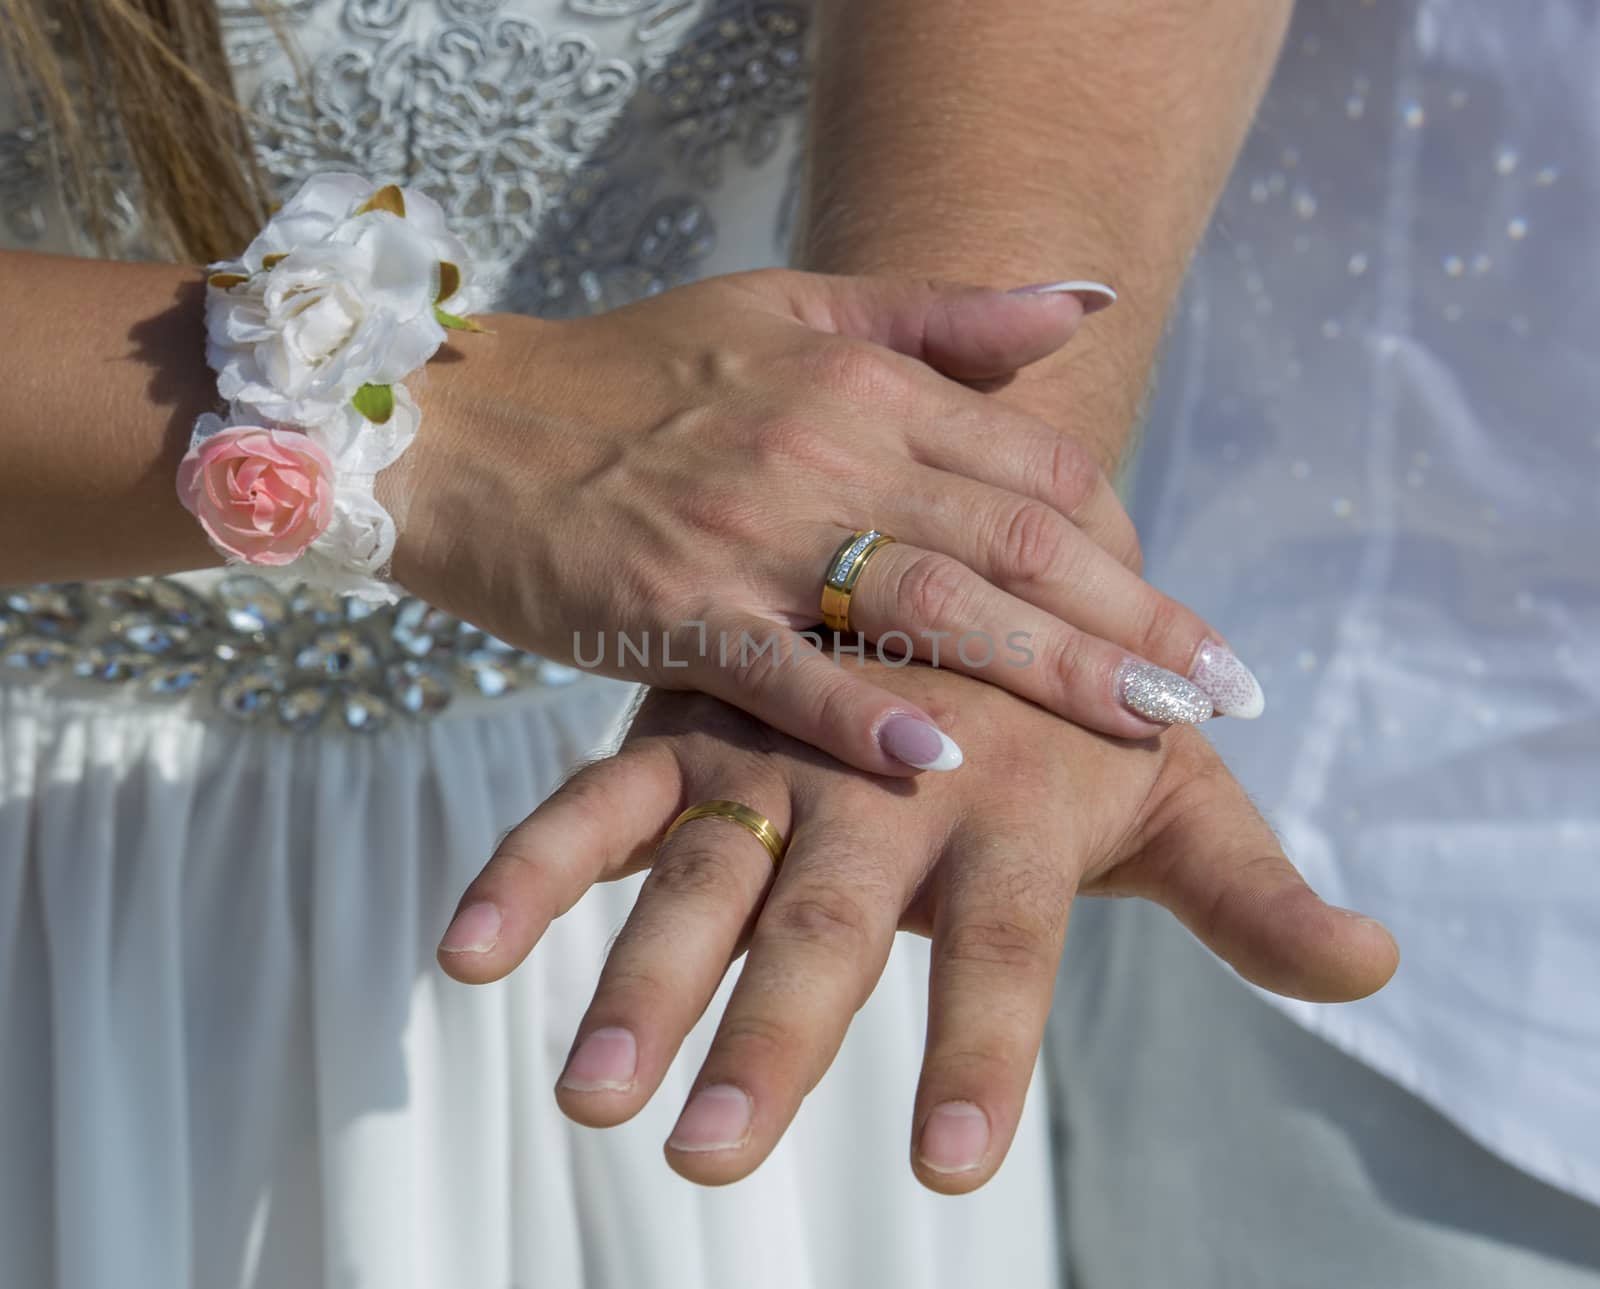 Closeup detail of bride and groom hands on wedding day with rings and bouquet flowers